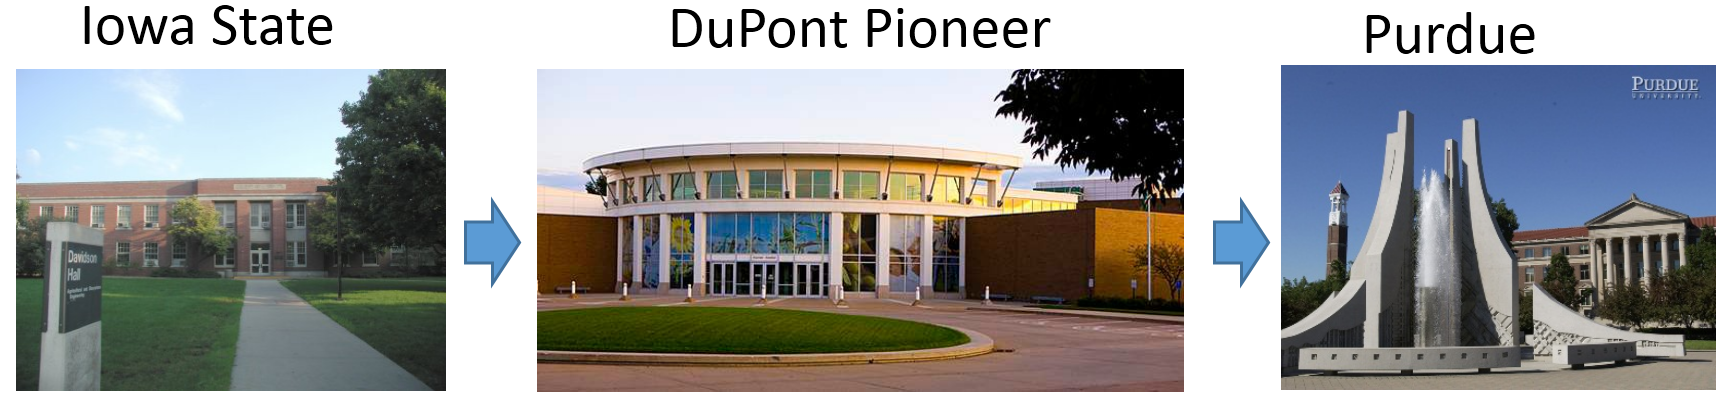 Iowa State to DuPont Pioneer to Purdue